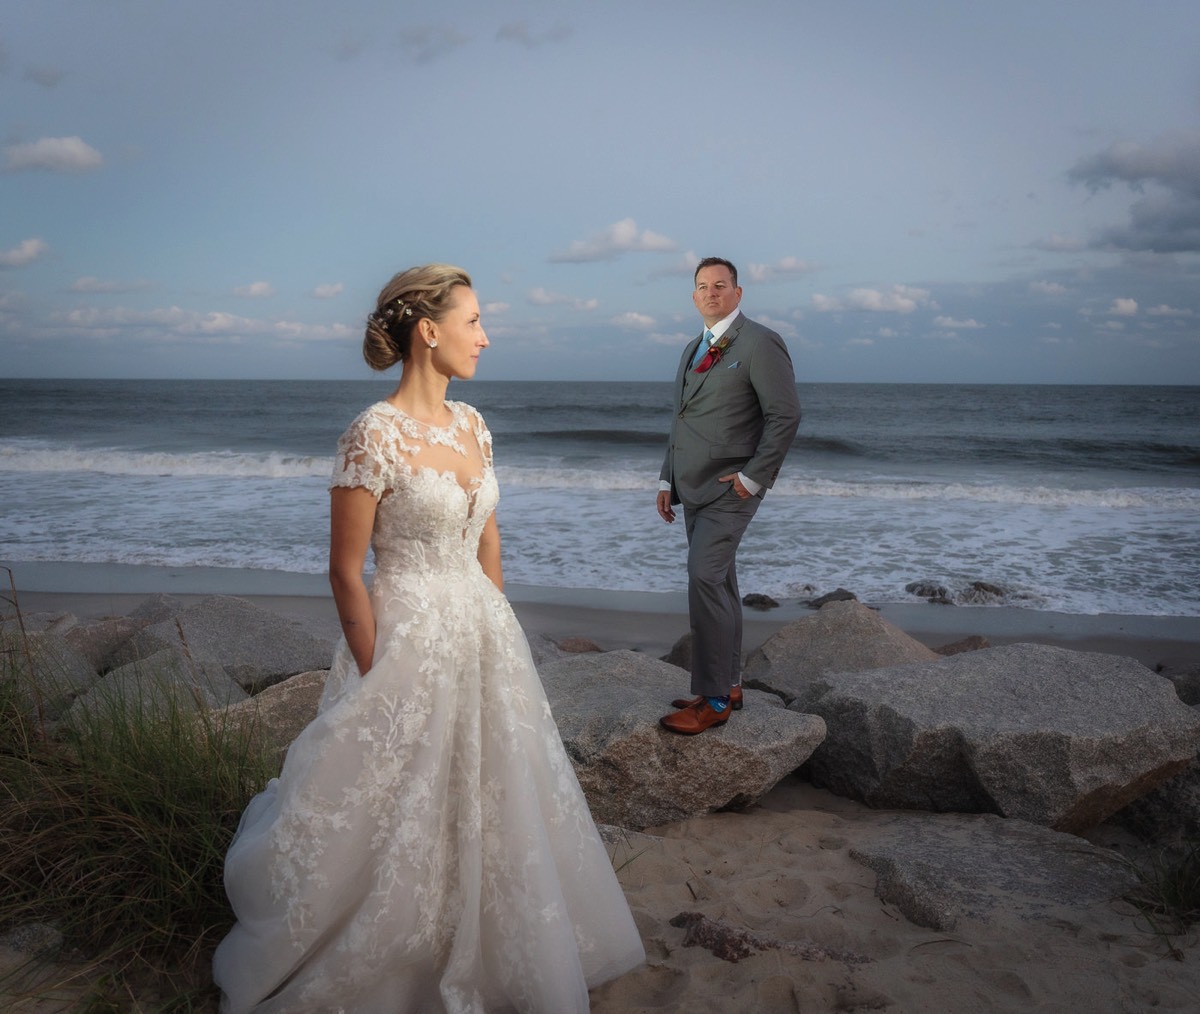 Fort Fisher Wedding Photographers - Ft Fisher Wedding Photography  - Bride & Groom  lifestyle wedding photo -   Fort Fisher North Carolina -  Wedding Photography - Wedding Ideas - Bride - Groom - Wedding Dress - Chris Lang Photography- Popular wedding location - 